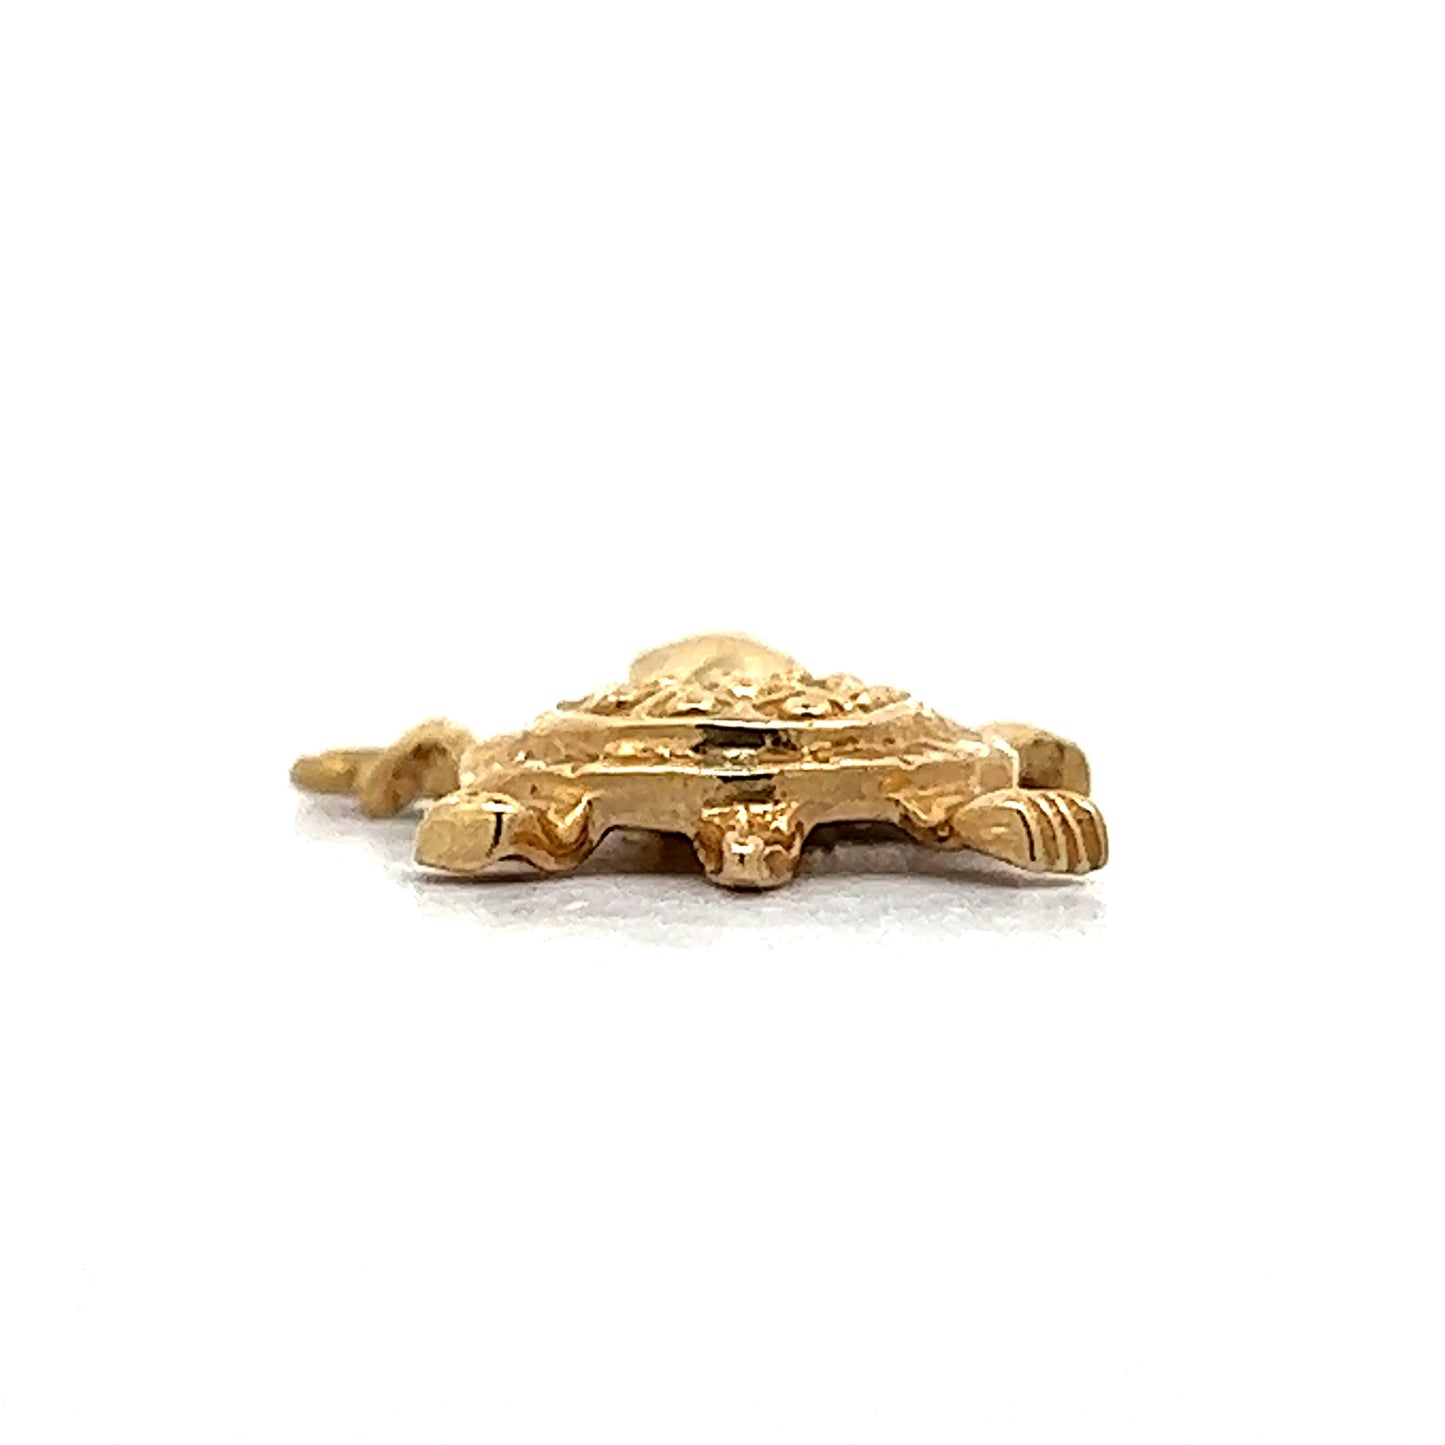 Vintage Turtle Charm in 14k Yellow Gold